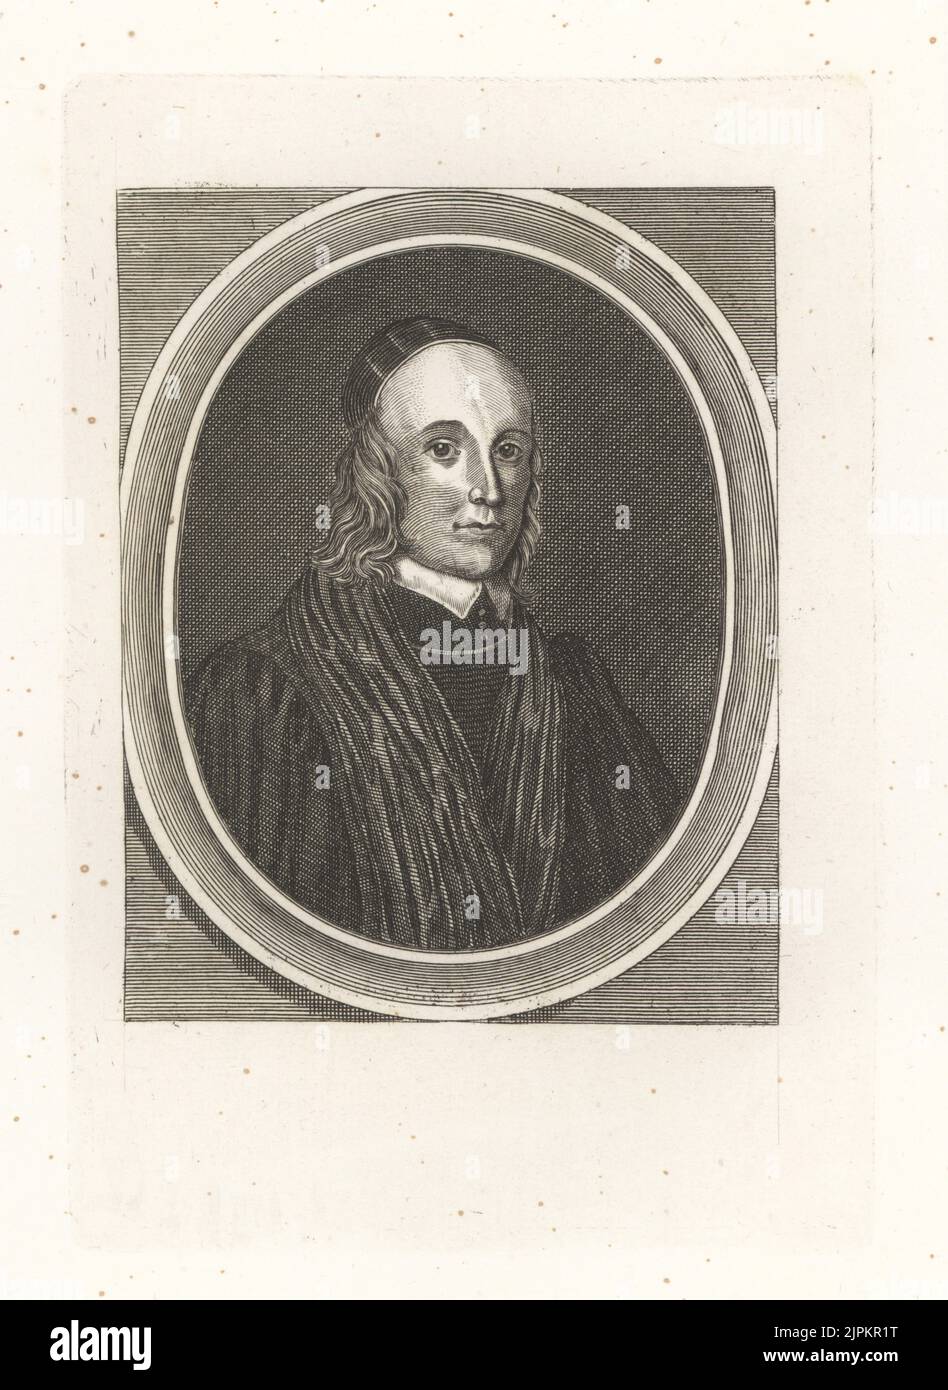 John Hewit, royalist divine, chaplain to King Charles I of England, 1614-1658. In skull cap, collar and ecclesiastical robes. Copperplate engraving from Samuel Woodburn’s Gallery of Rare Portraits Consisting of Original Plates, George Jones, 102 St Martin’s Lane, London, 1816. Stock Photo